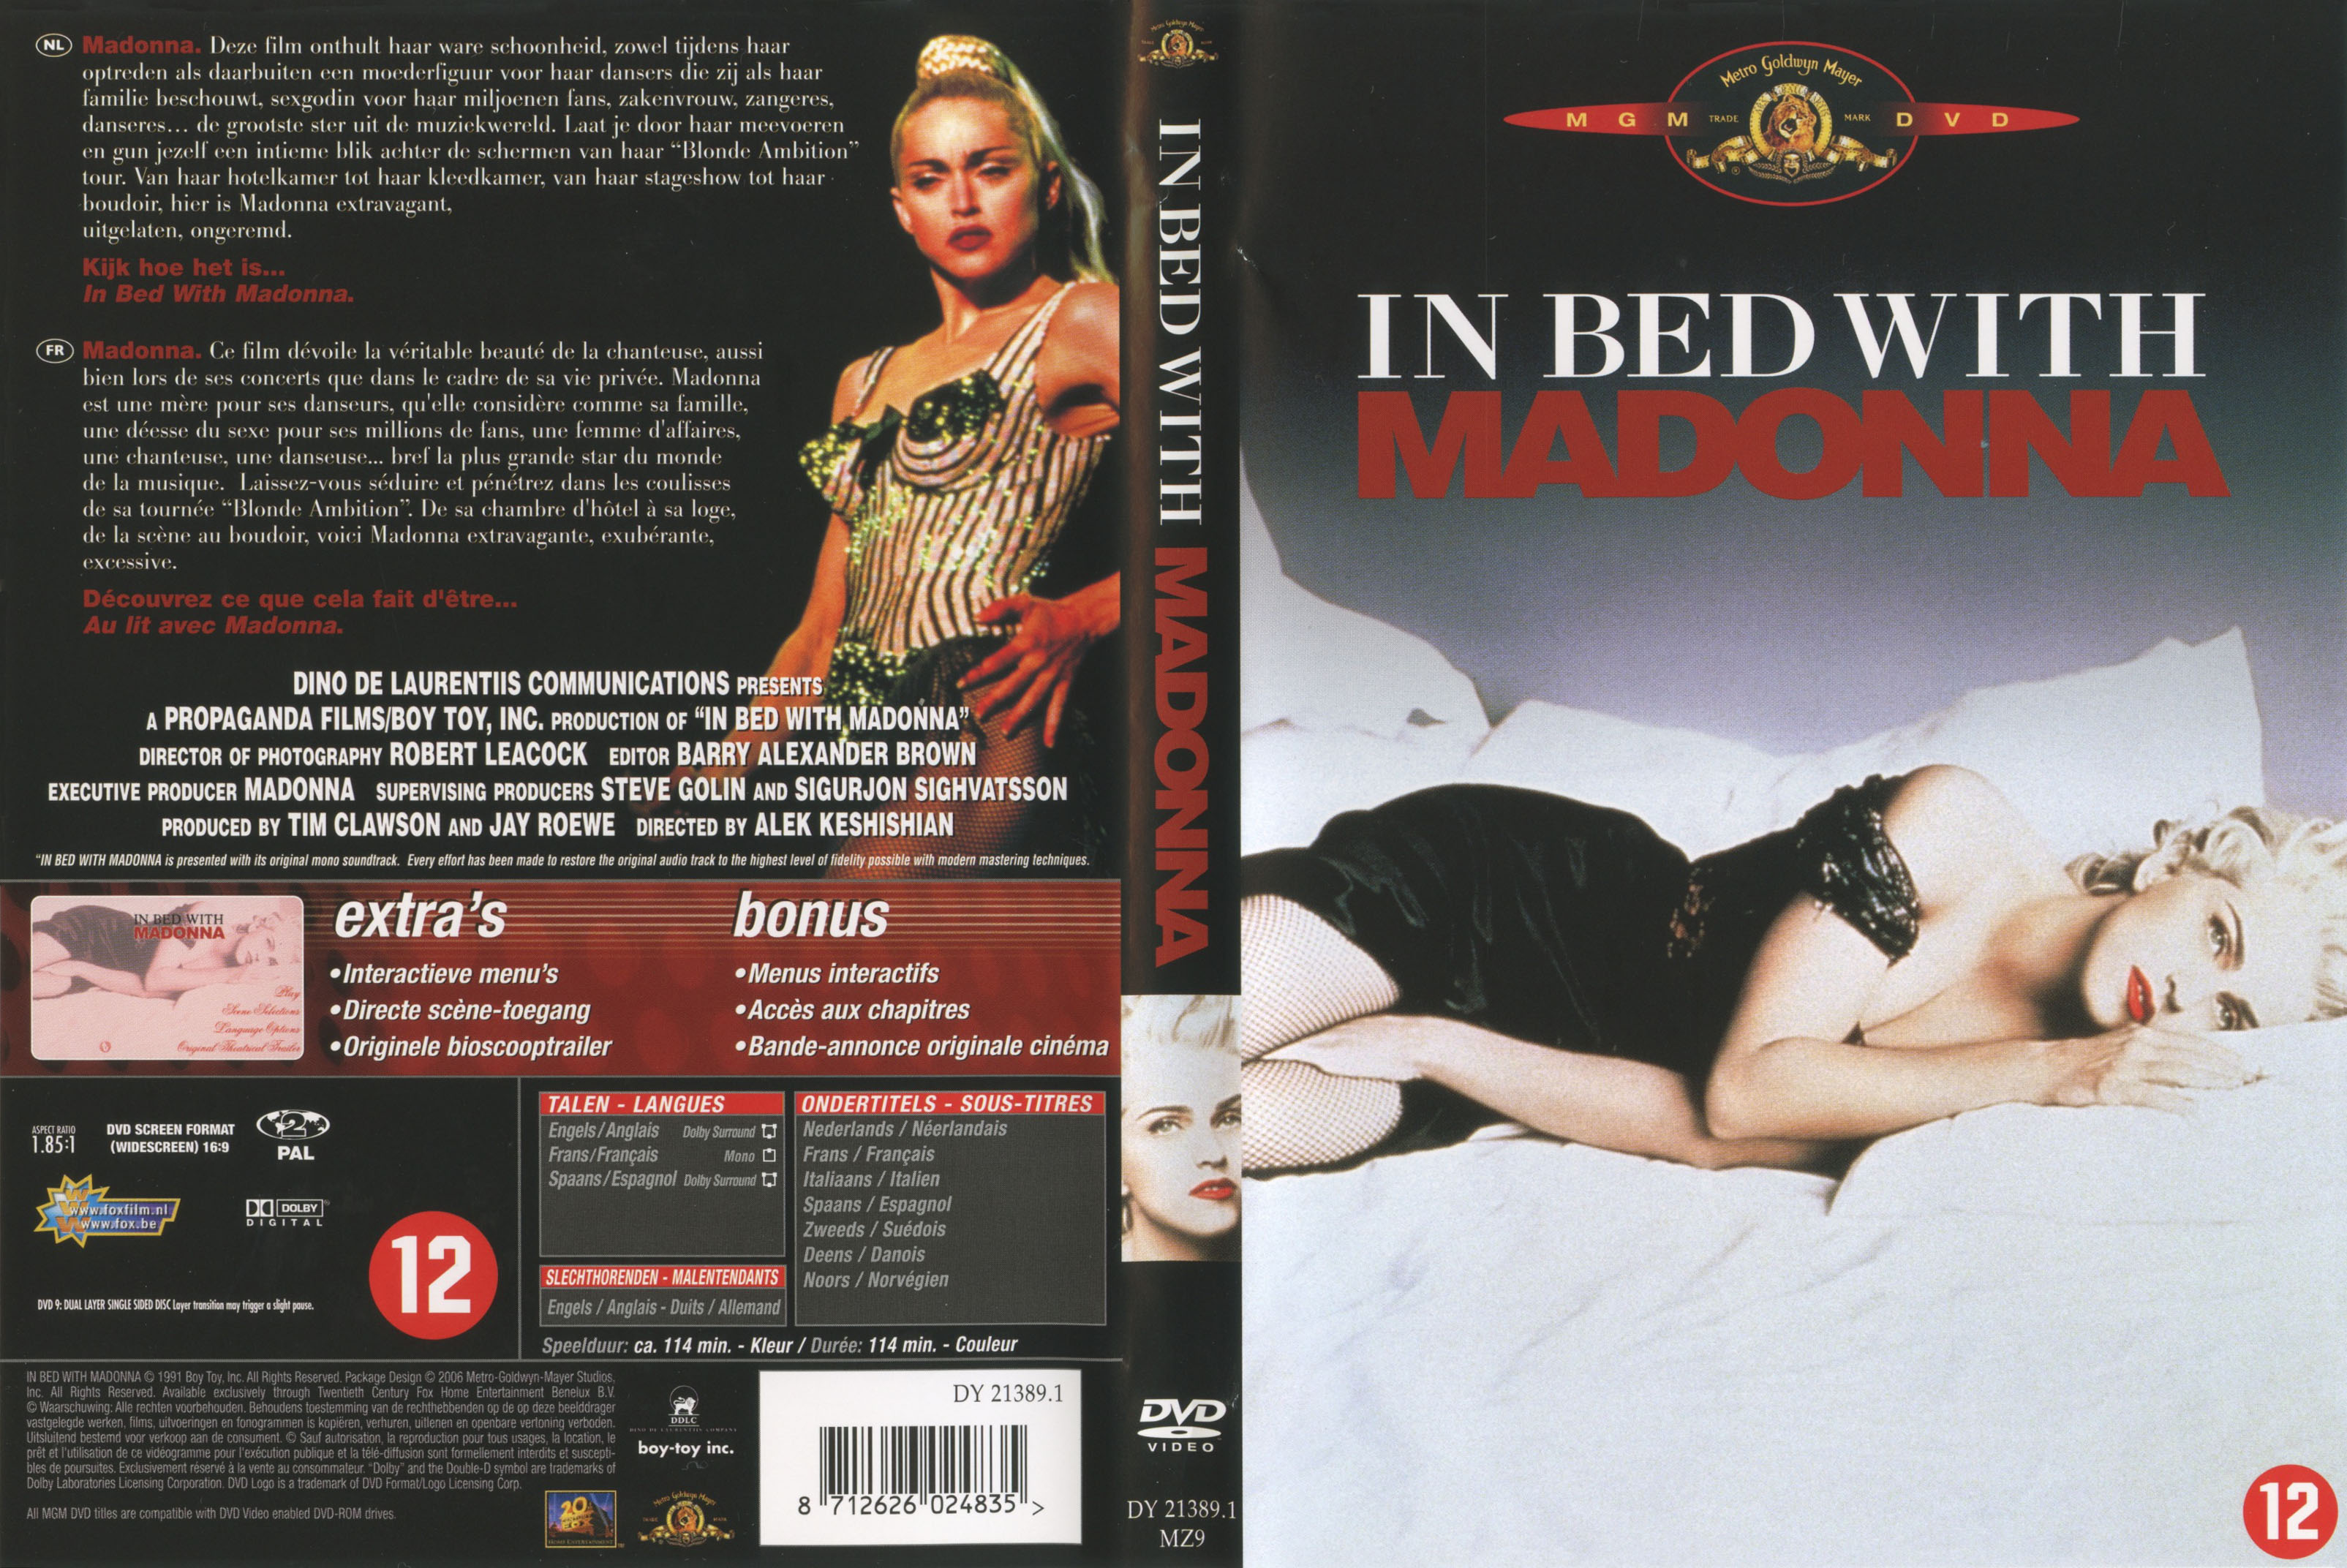 Jaquette DVD In bed with Madonna